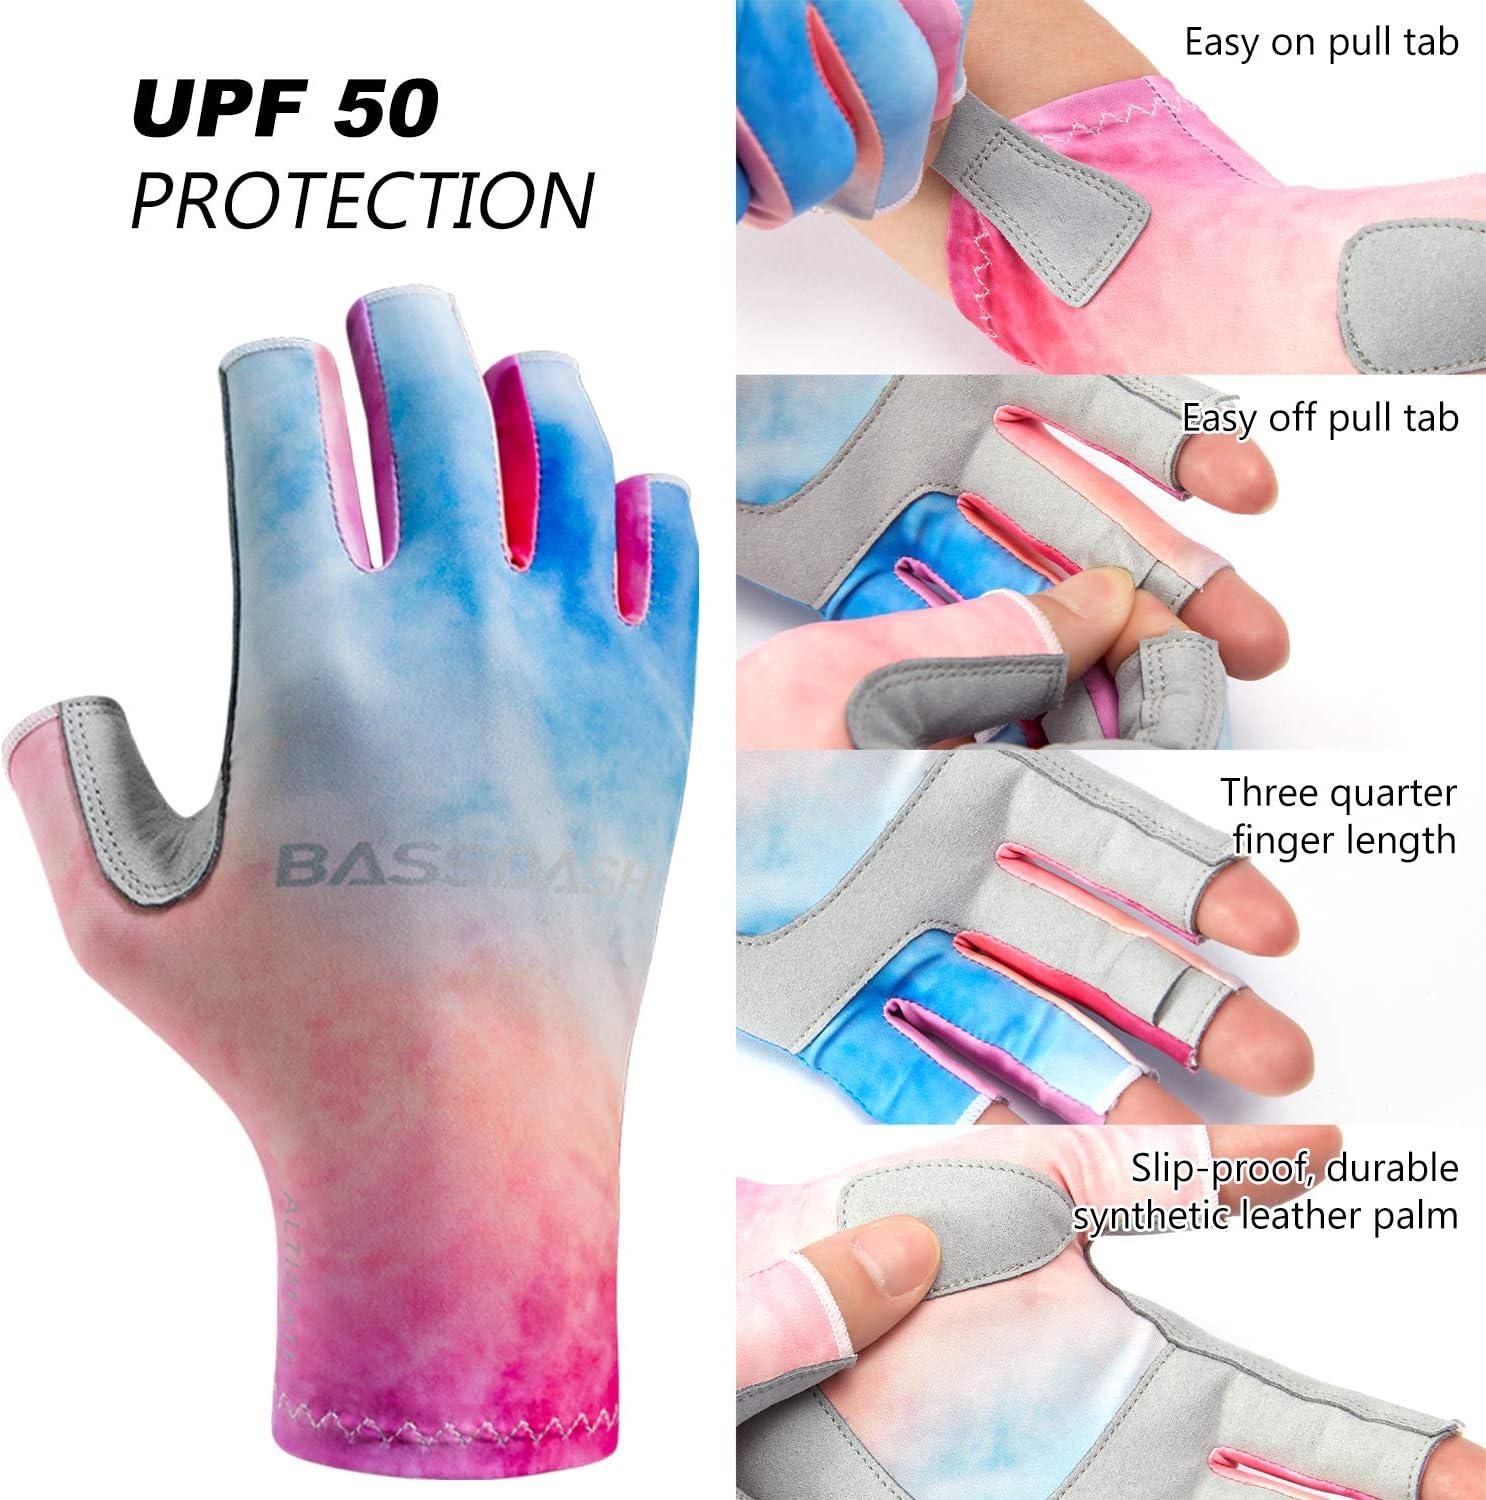 BASSDASH ALTIMATE UPF 50+ Womens Fishing Gloves UV Sun Protection  Fingerless Gloves for Kayaking Paddling Hiking Cycling Driving Shooting  Training Rosy Clouds Small